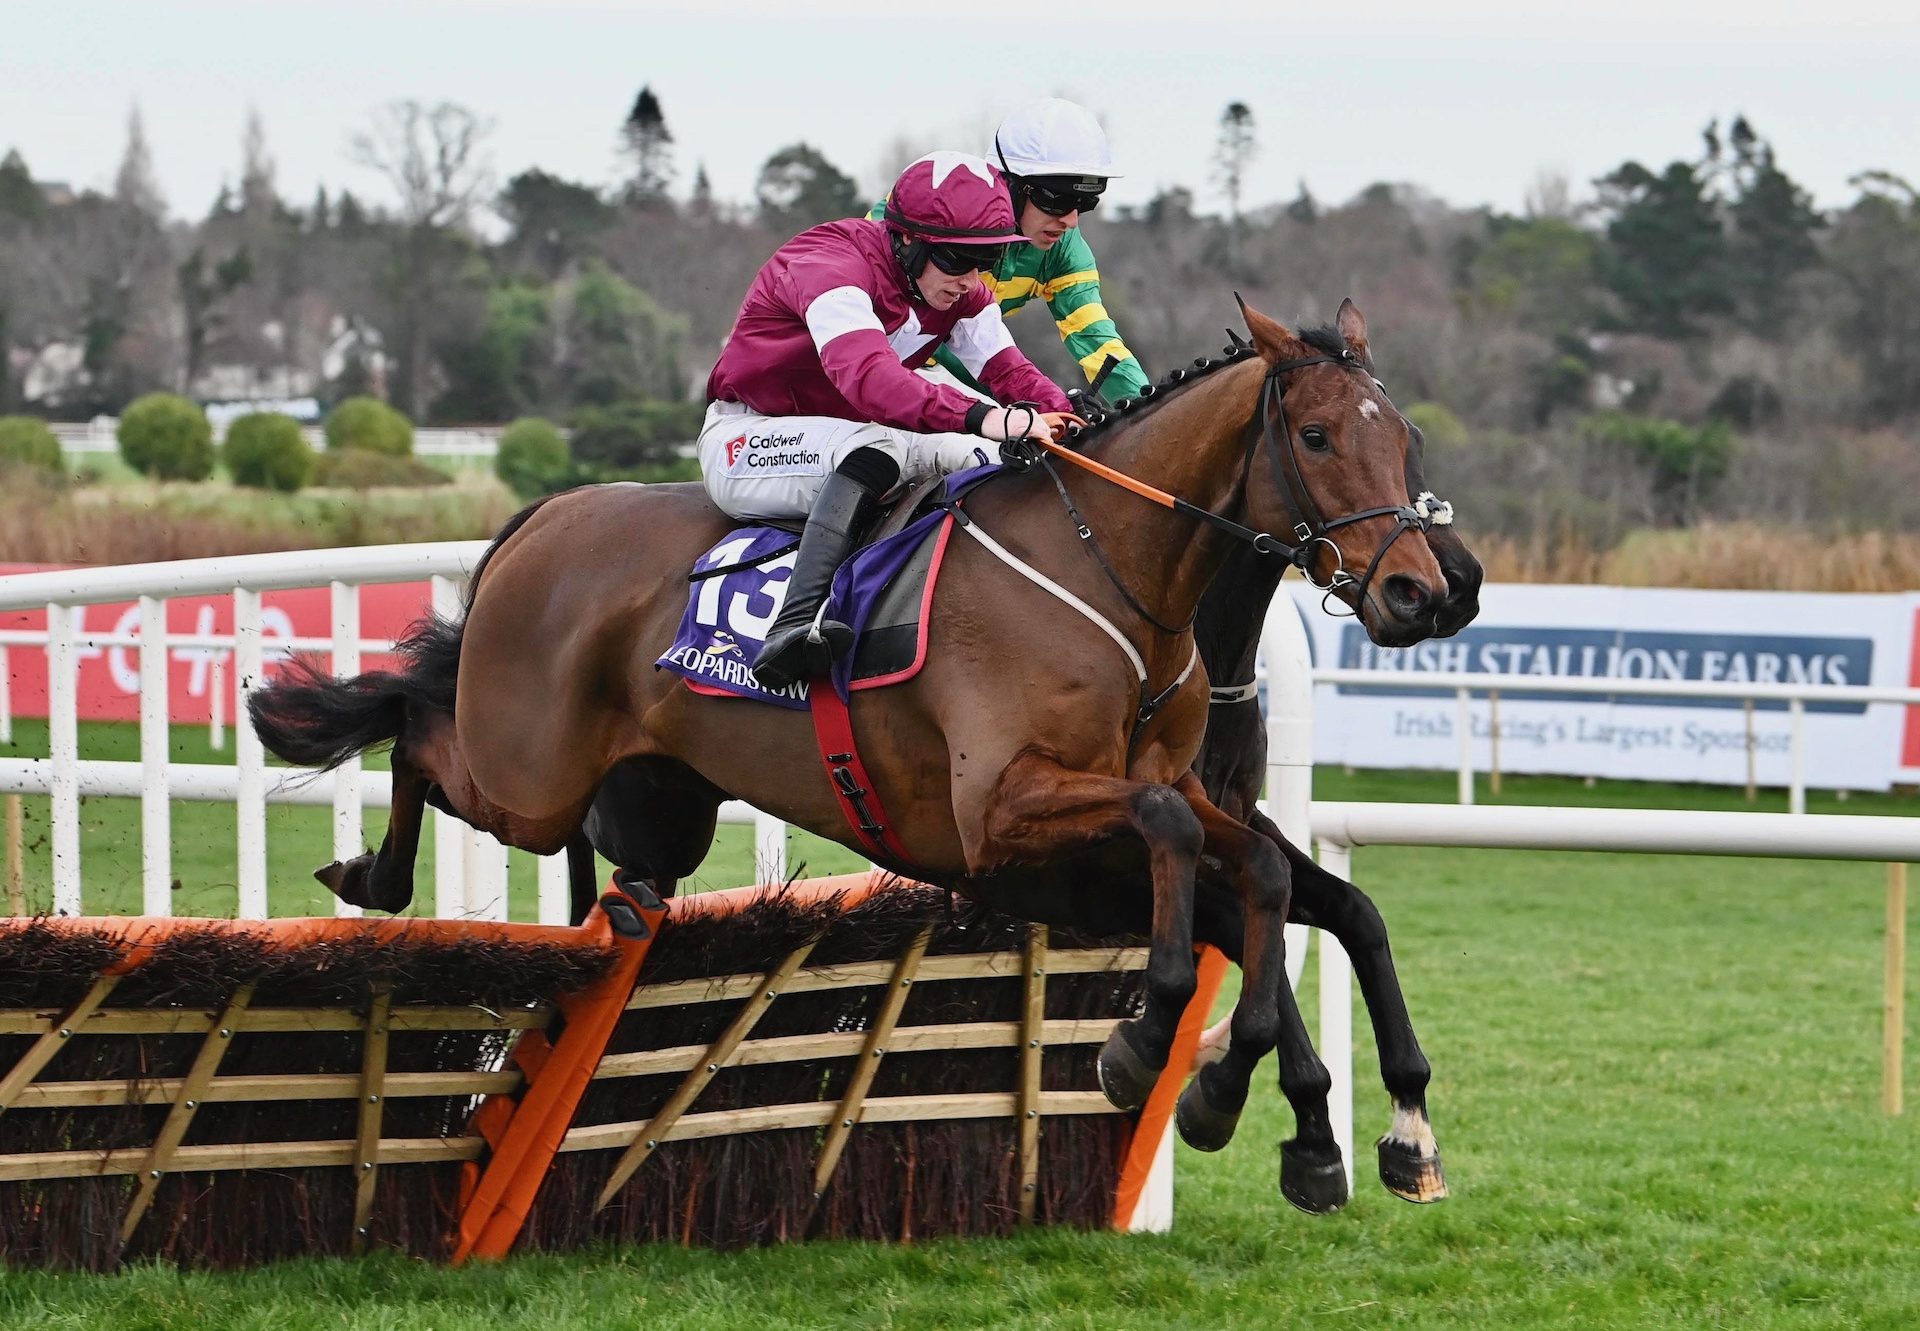 King Of Kingsfield (Vadamos) Wins The Maiden Hurdle At Leopardstown